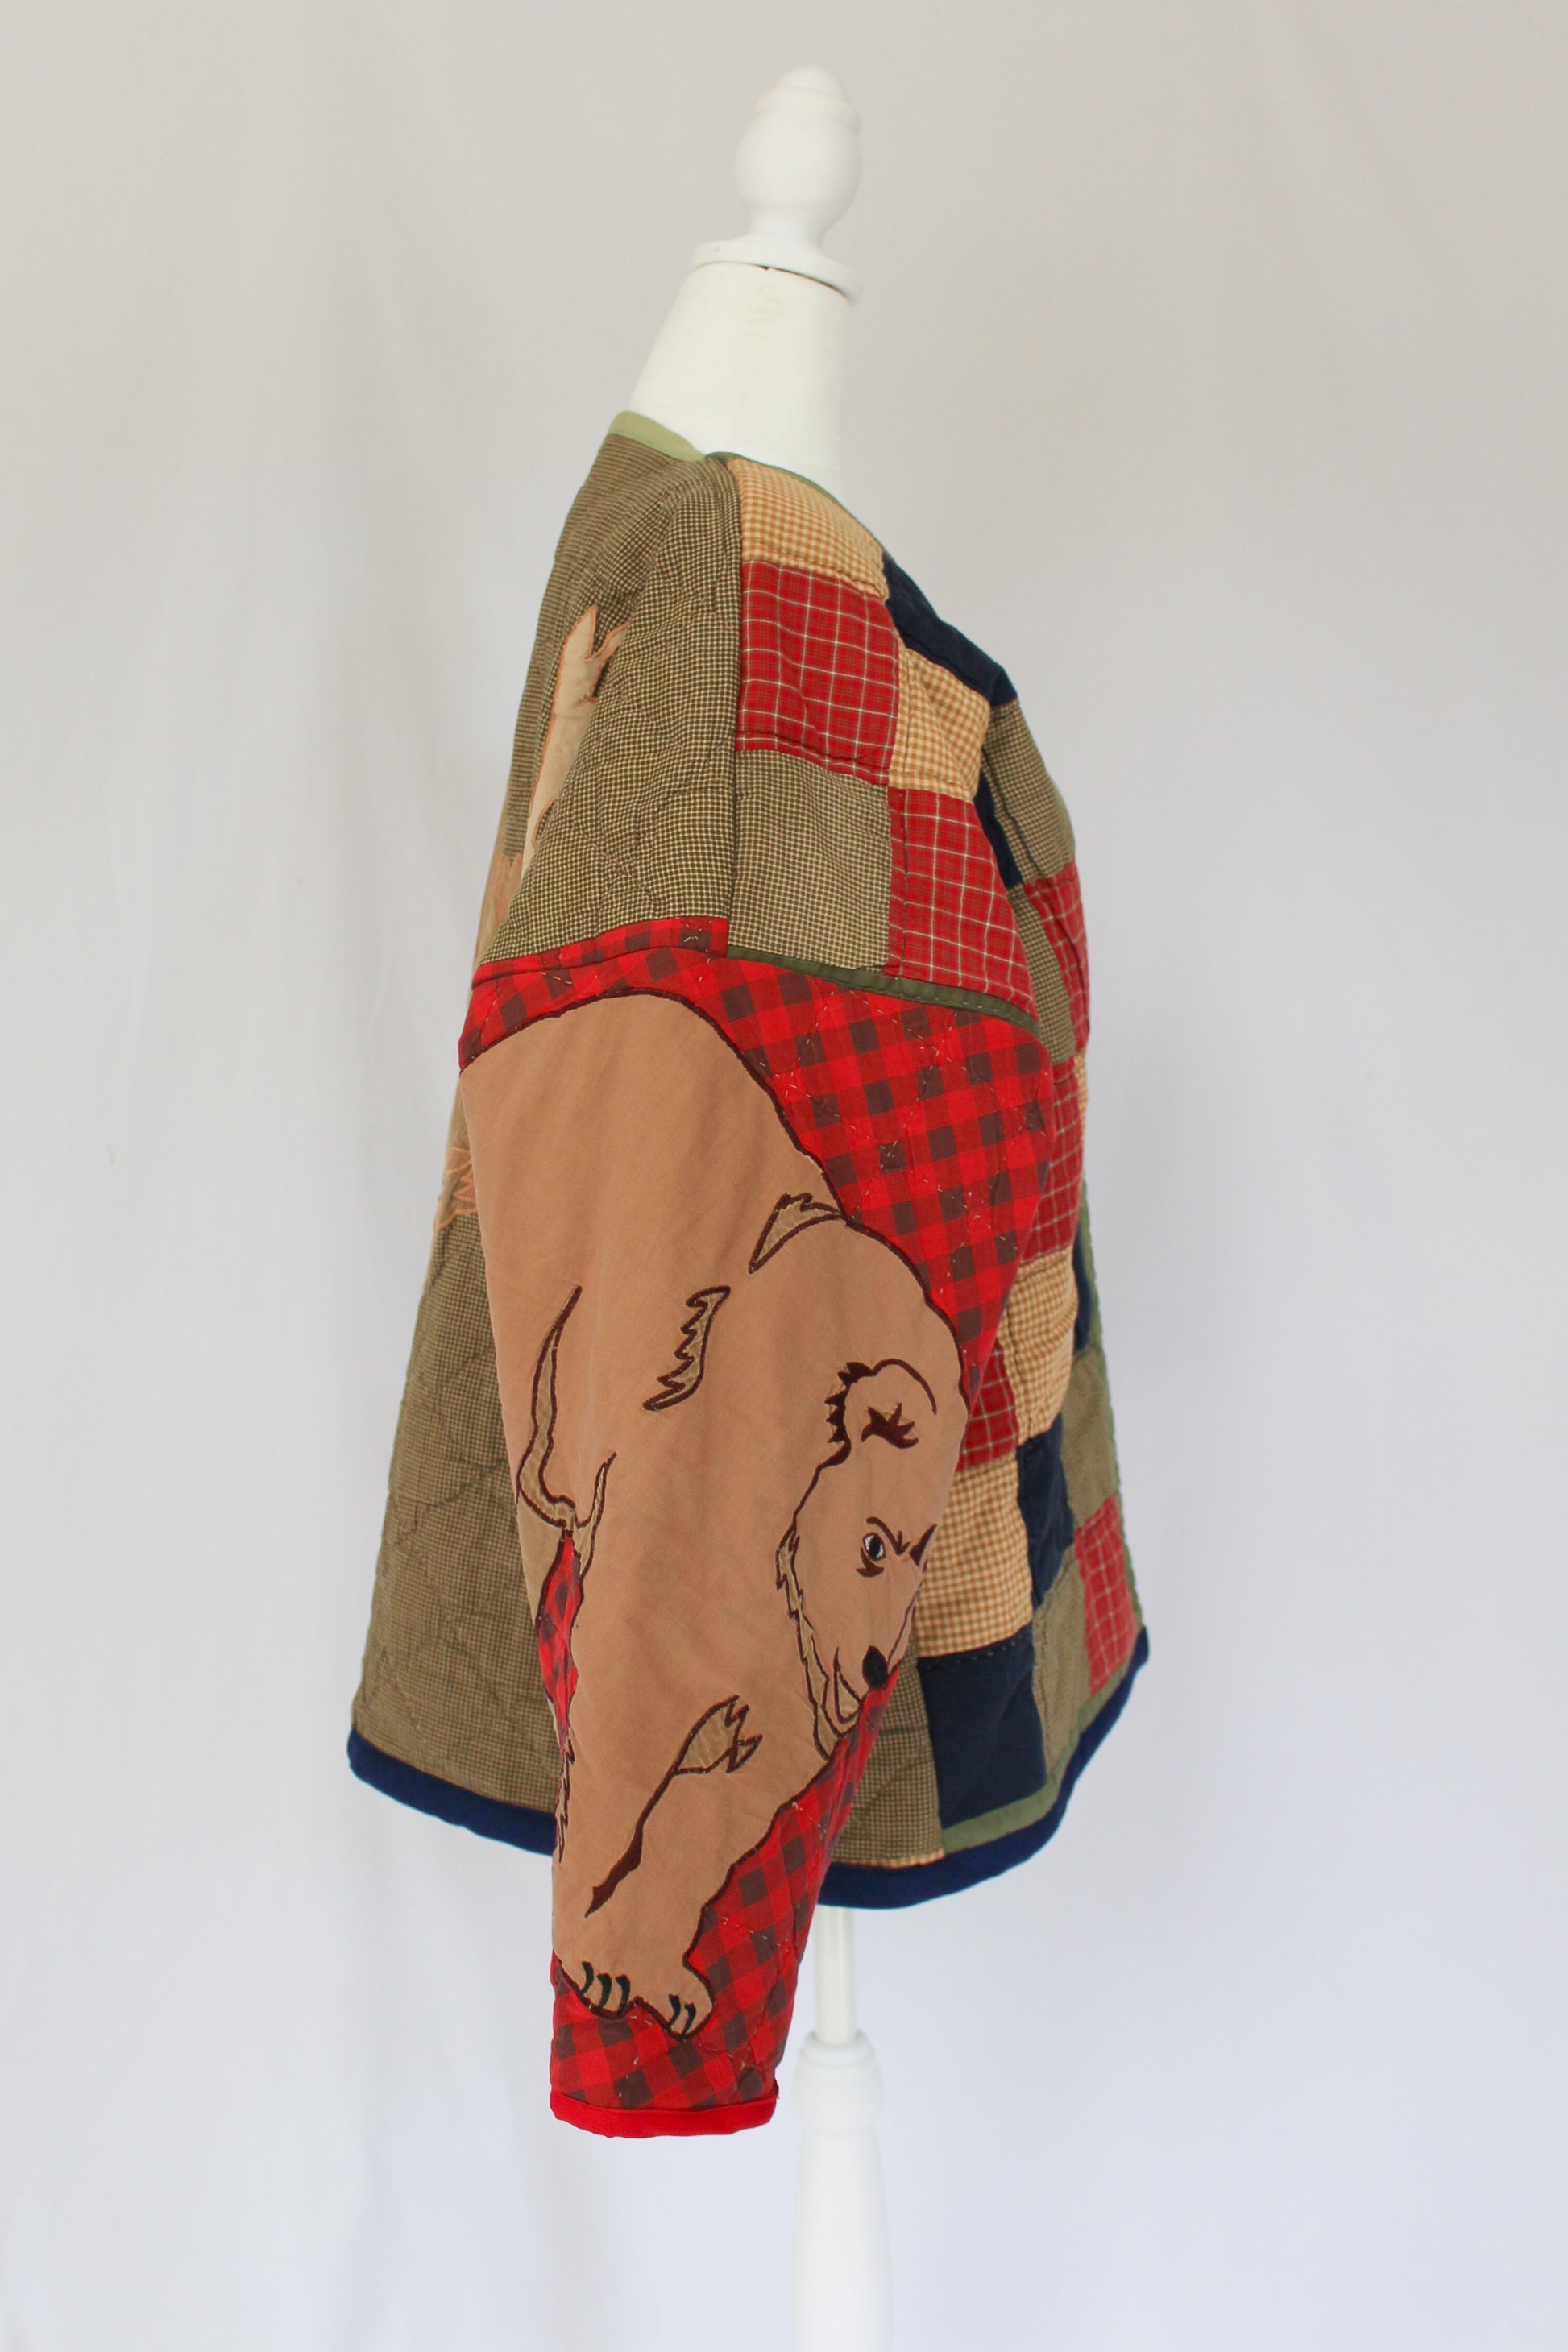 cabin jacket with a bear, bear jacket, quilt jacket, recycled quilt jacket